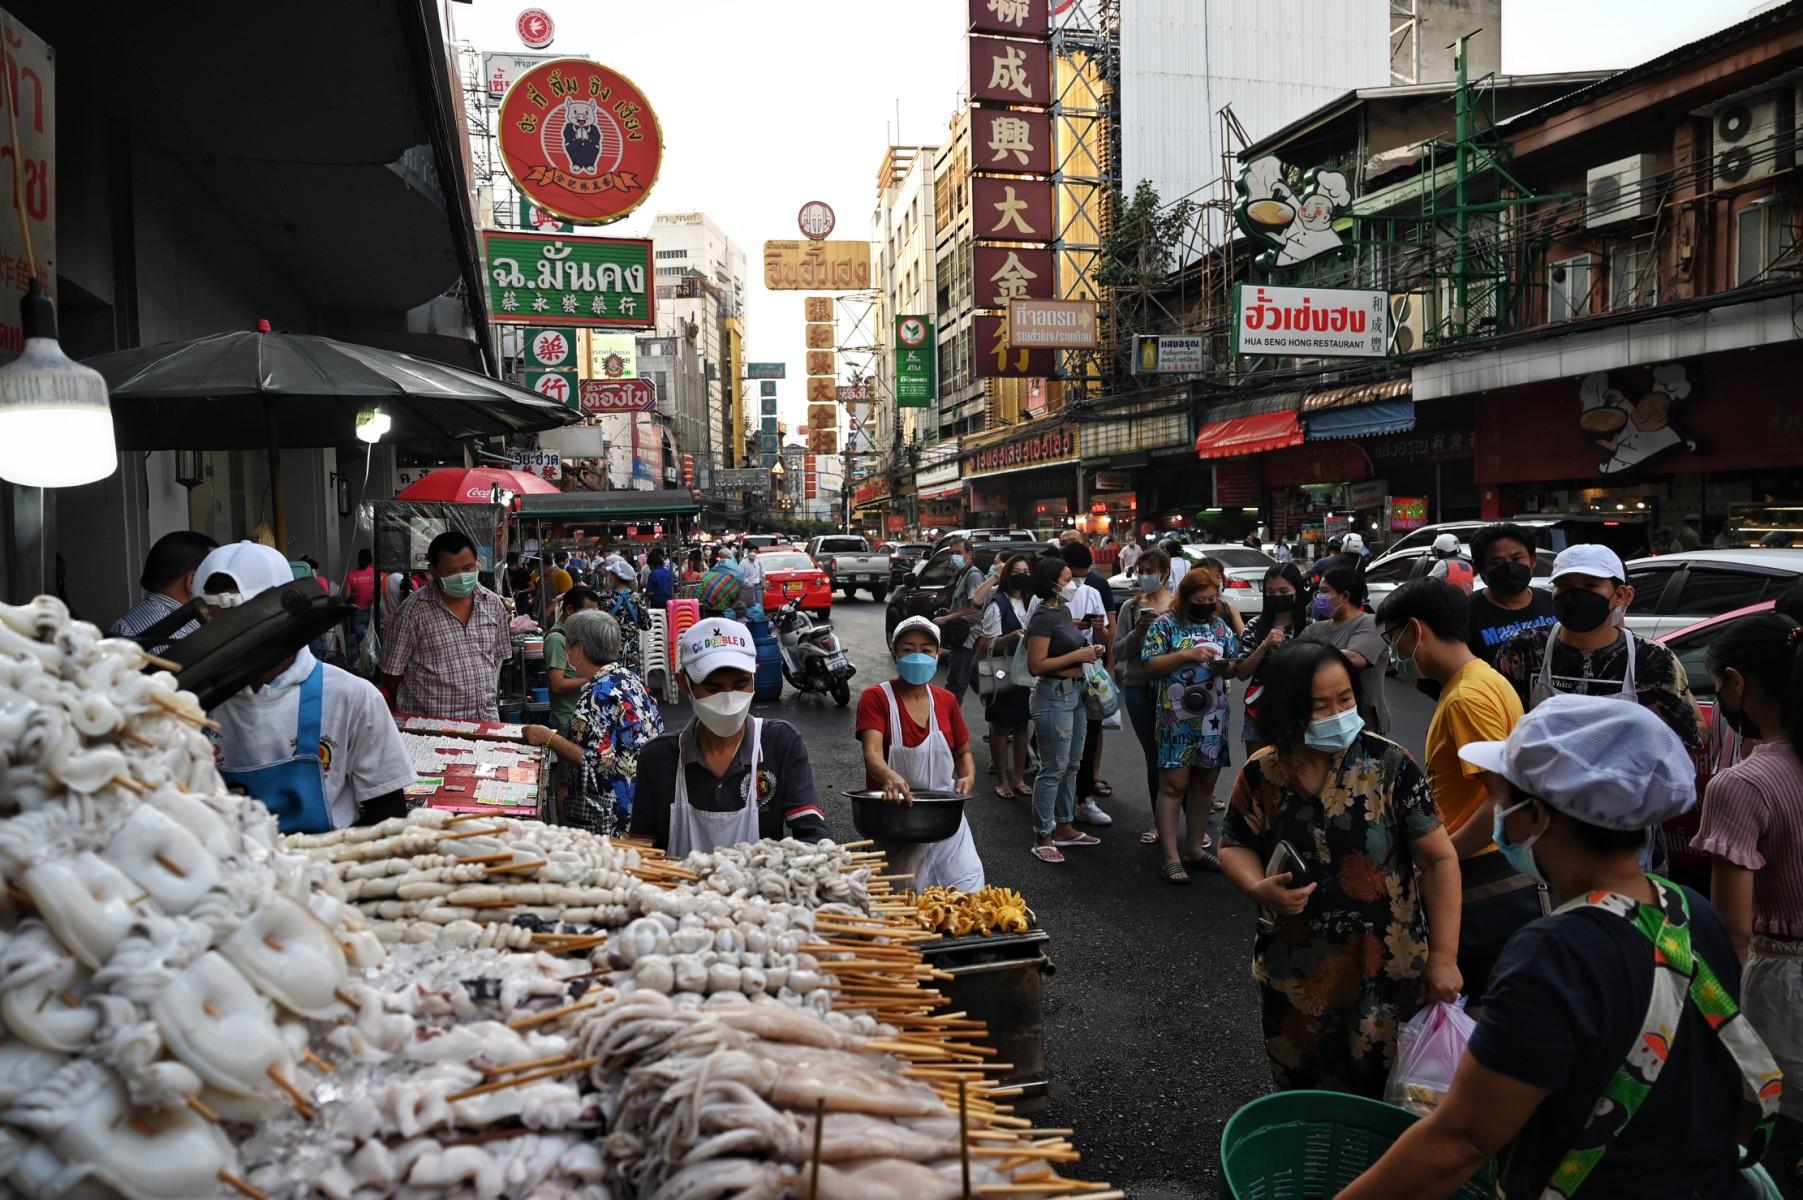 Thailand's economy has been hammered by the pandemic, growing by just 1.6% last year after a 6.2% contraction in 2020 – its worst performance since the 1997 Asian financial crisis. Photo: AFP